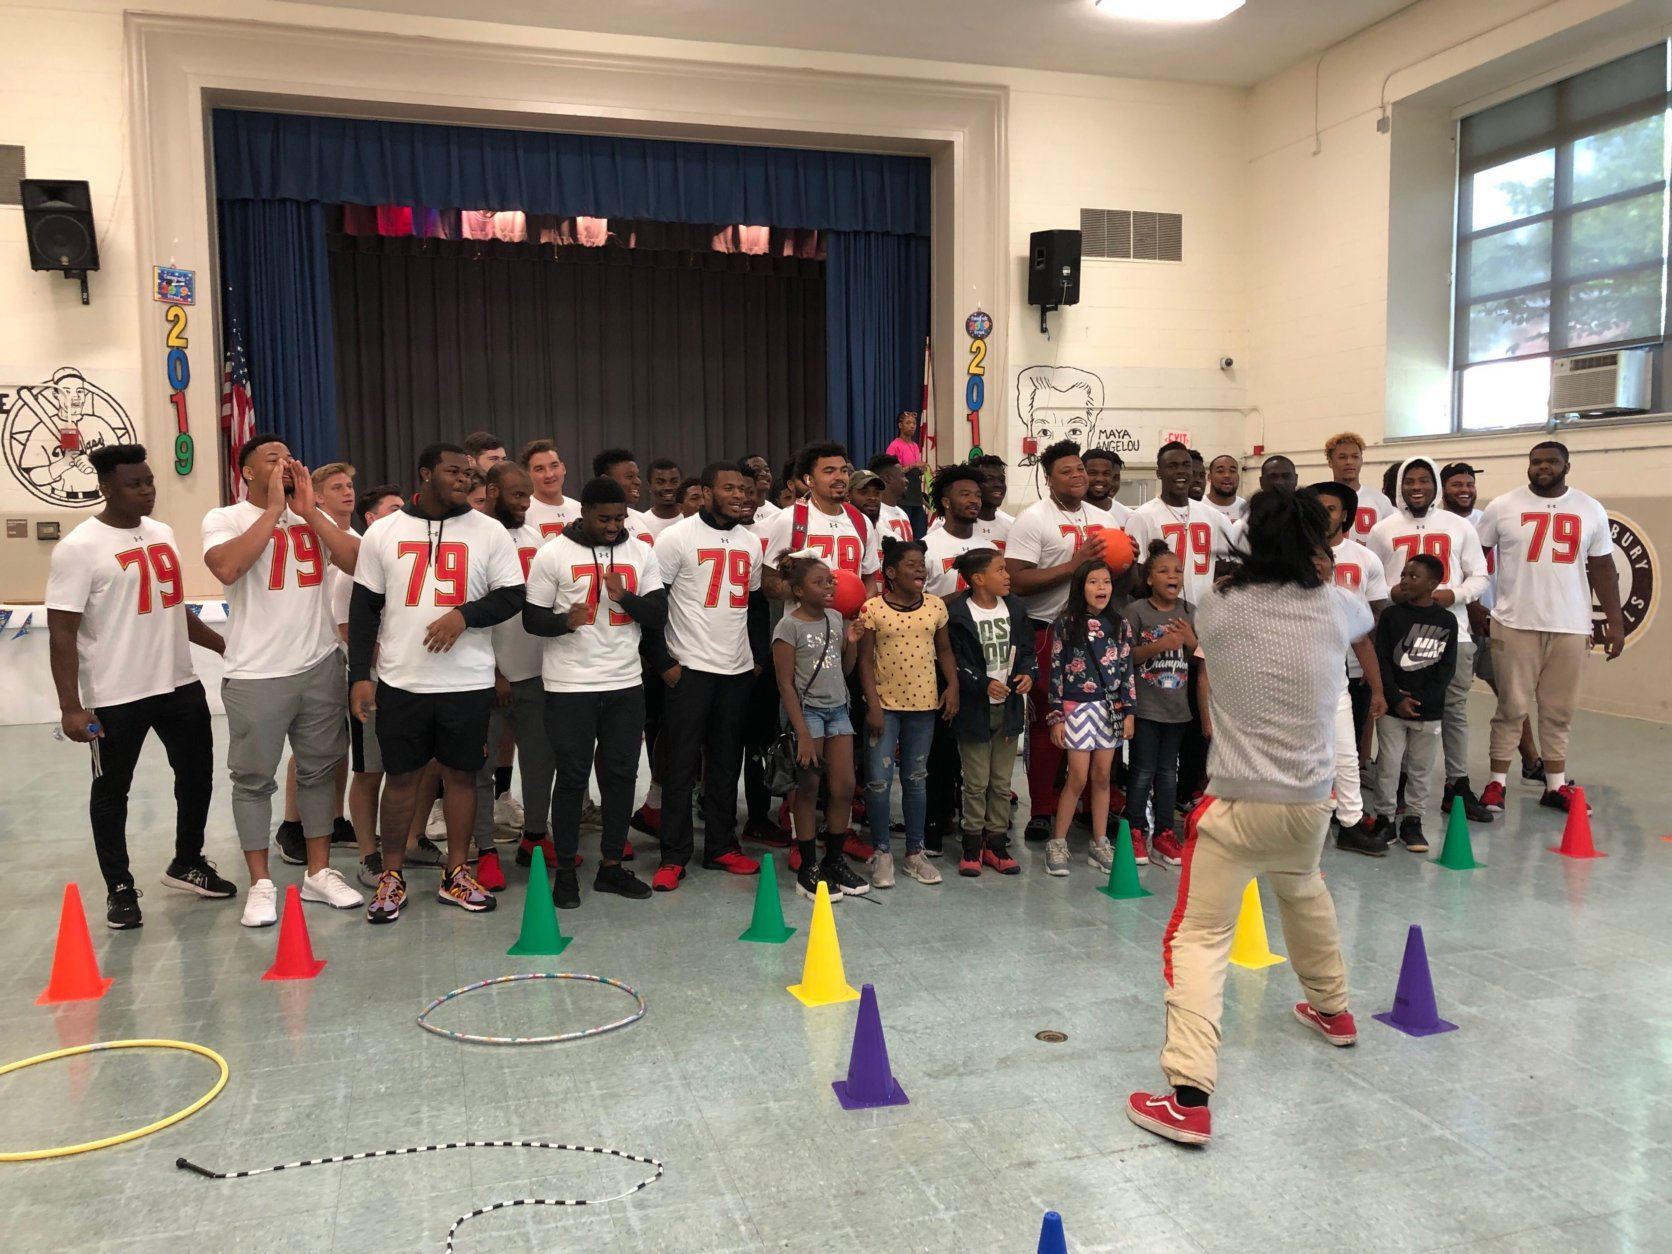 University of Maryland football players cheer with students at J.C. Nalle Elementary to celebrate Jordan McNair. (WTOP/Michelle Basch)